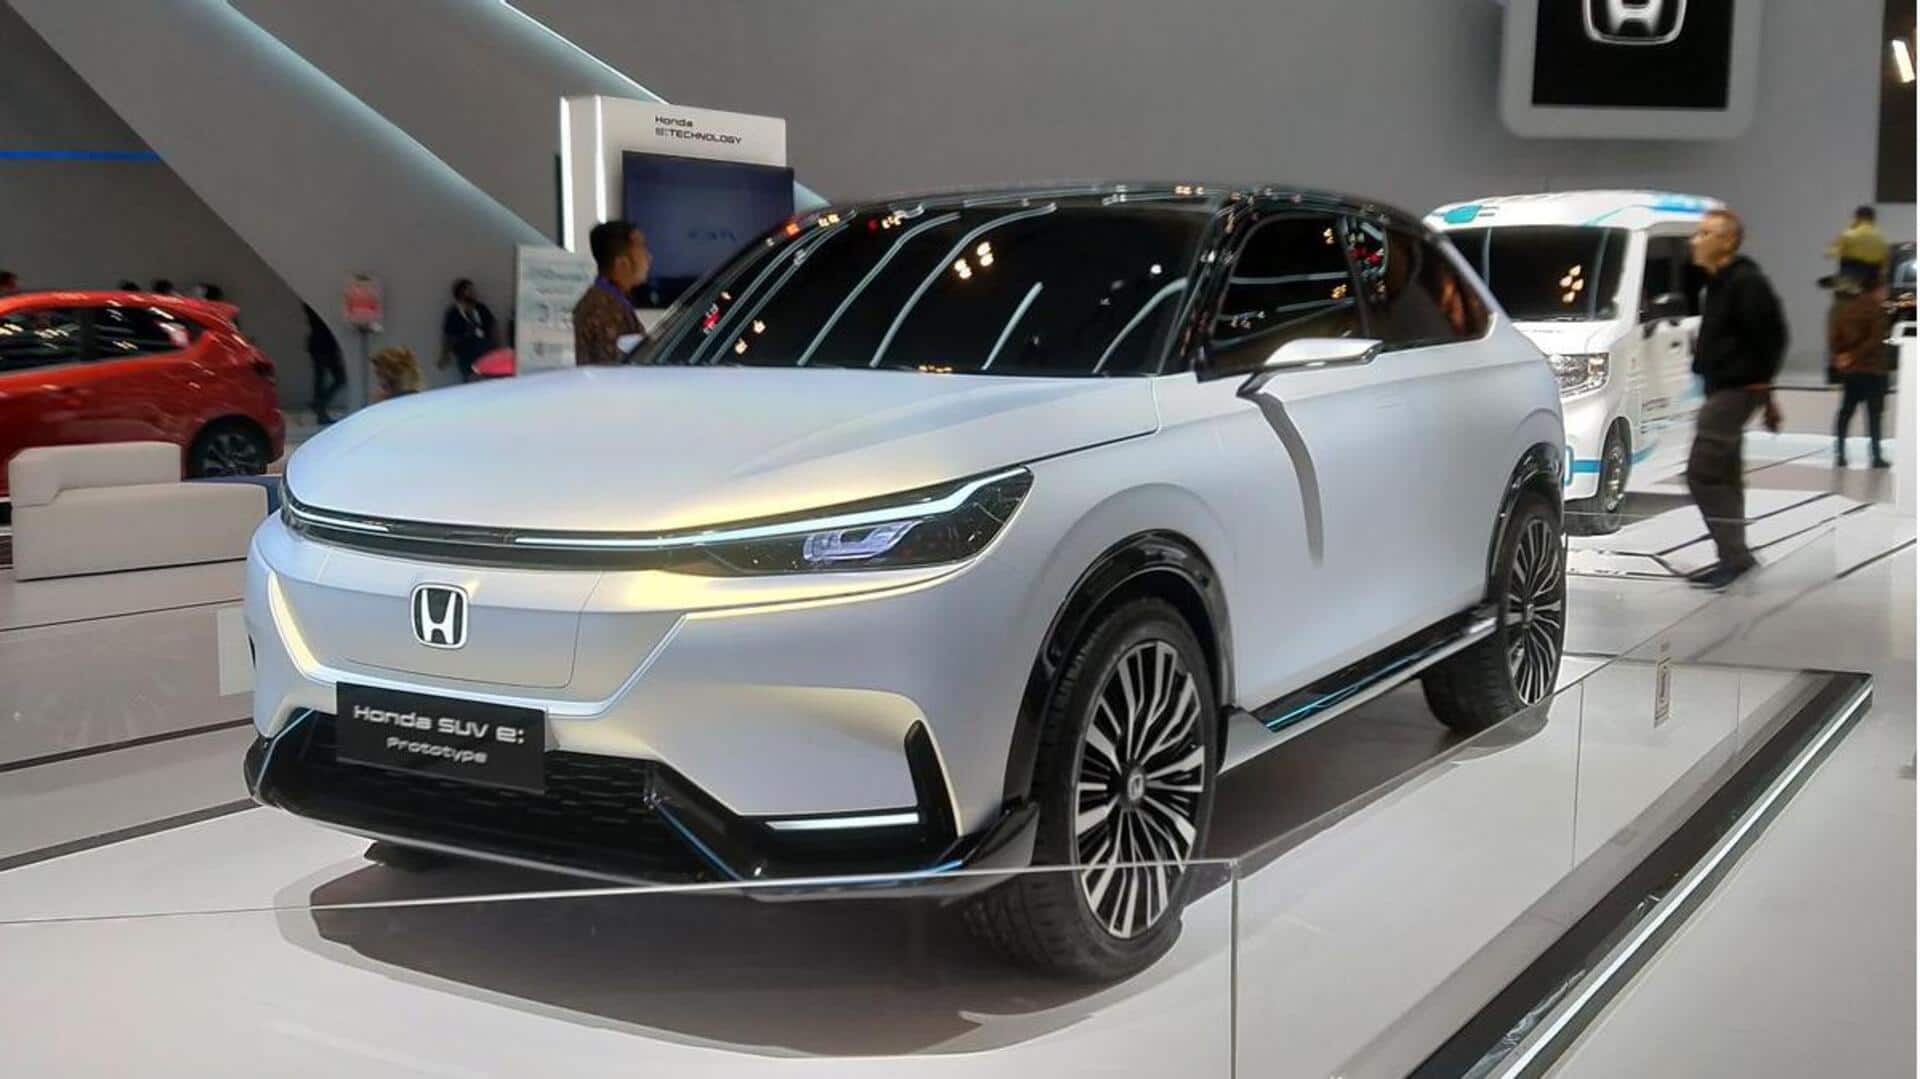 Honda reveals all-electric SUV concept with ADAS features